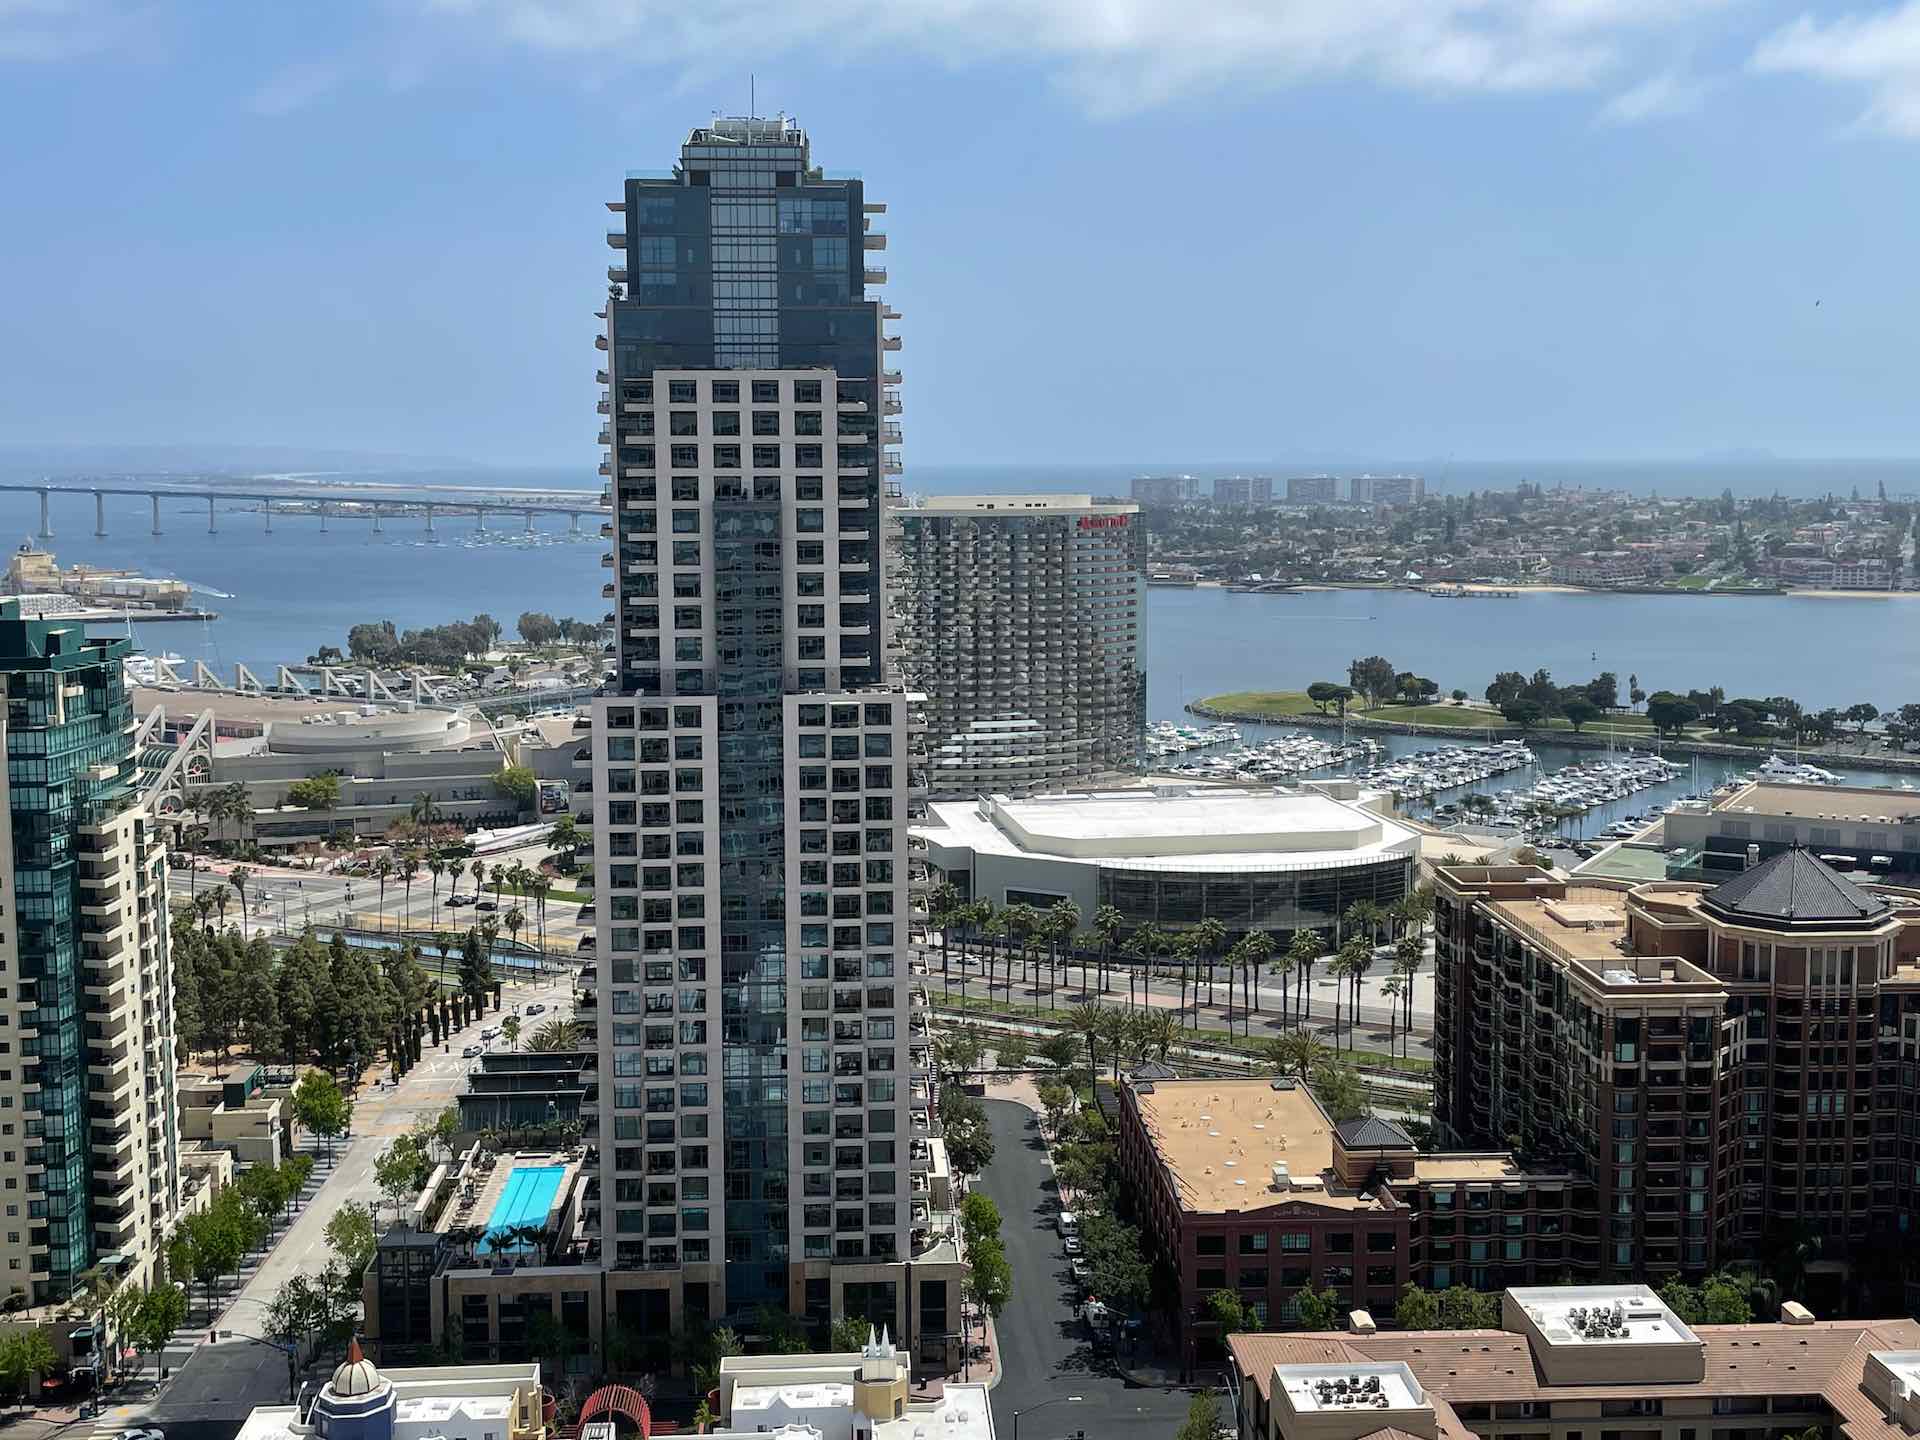 The Pinnacle museum tower in Marina District San Diego